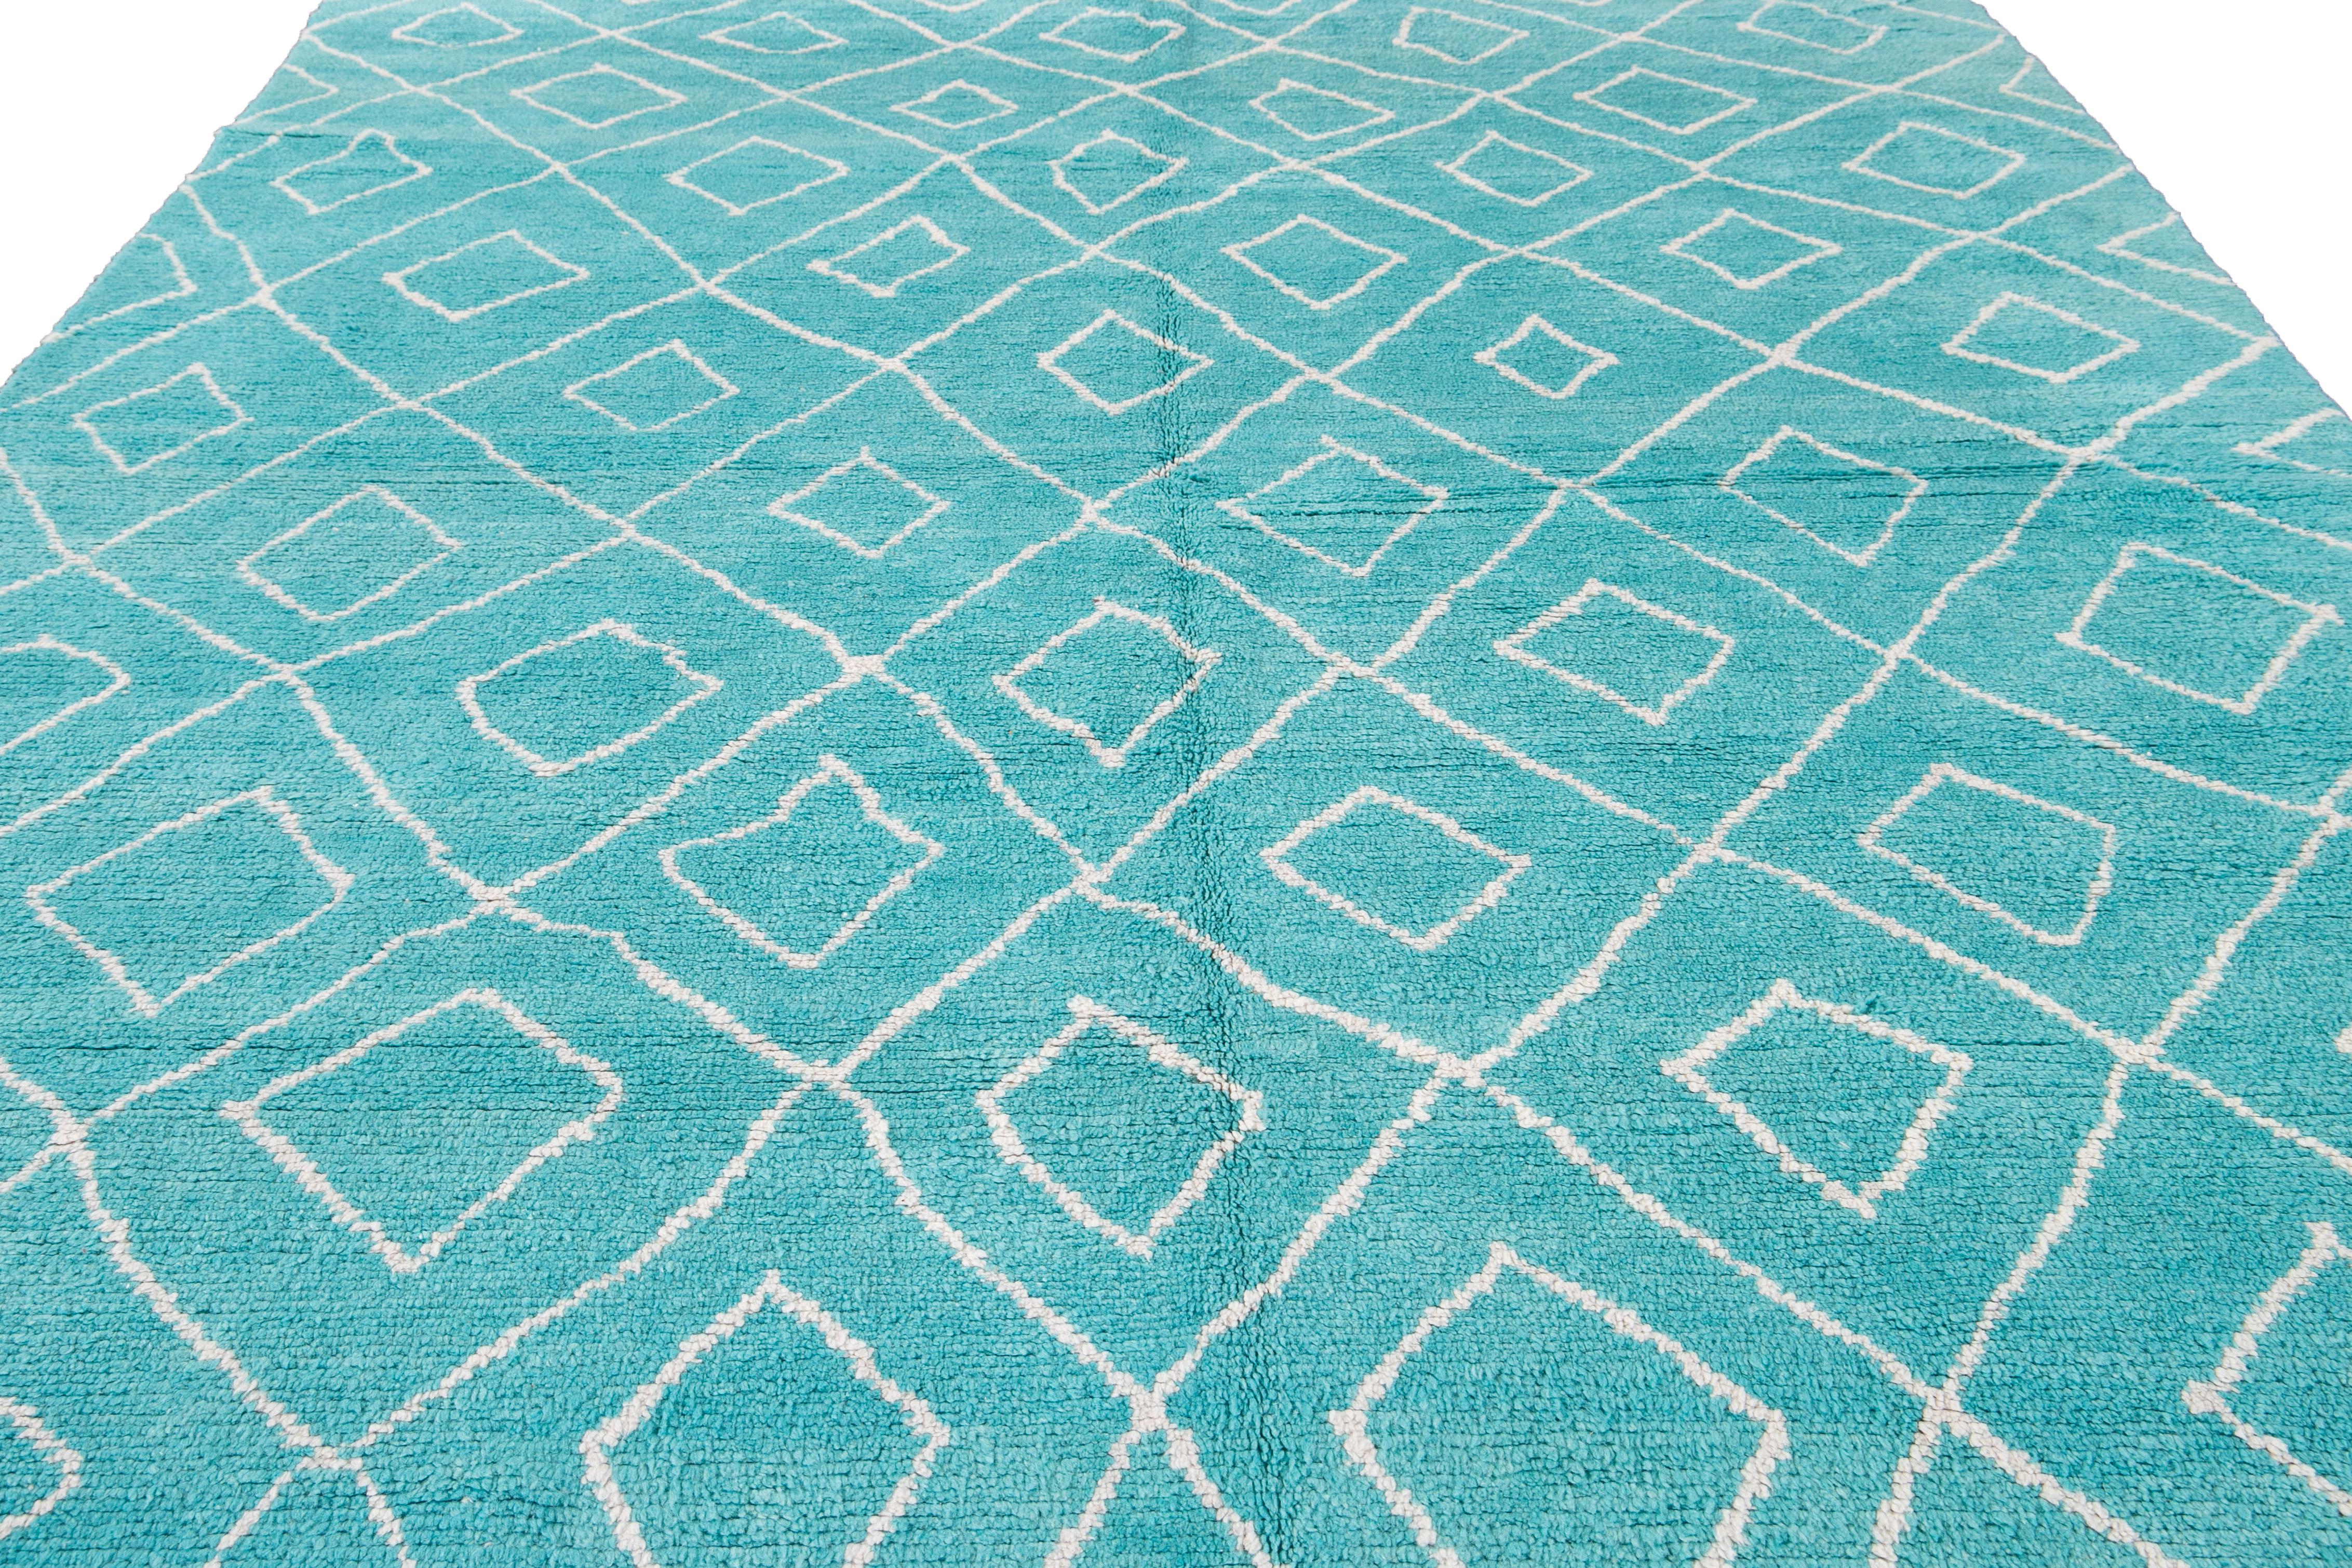 This exquisite hand-knotted wool rug highlights a mesmerizing Moroccan pattern, predominantly in an elegant ivory hue, which beautifully contrasts against a captivating background in aqua. The visually stunning Tribal design exudes a sense of